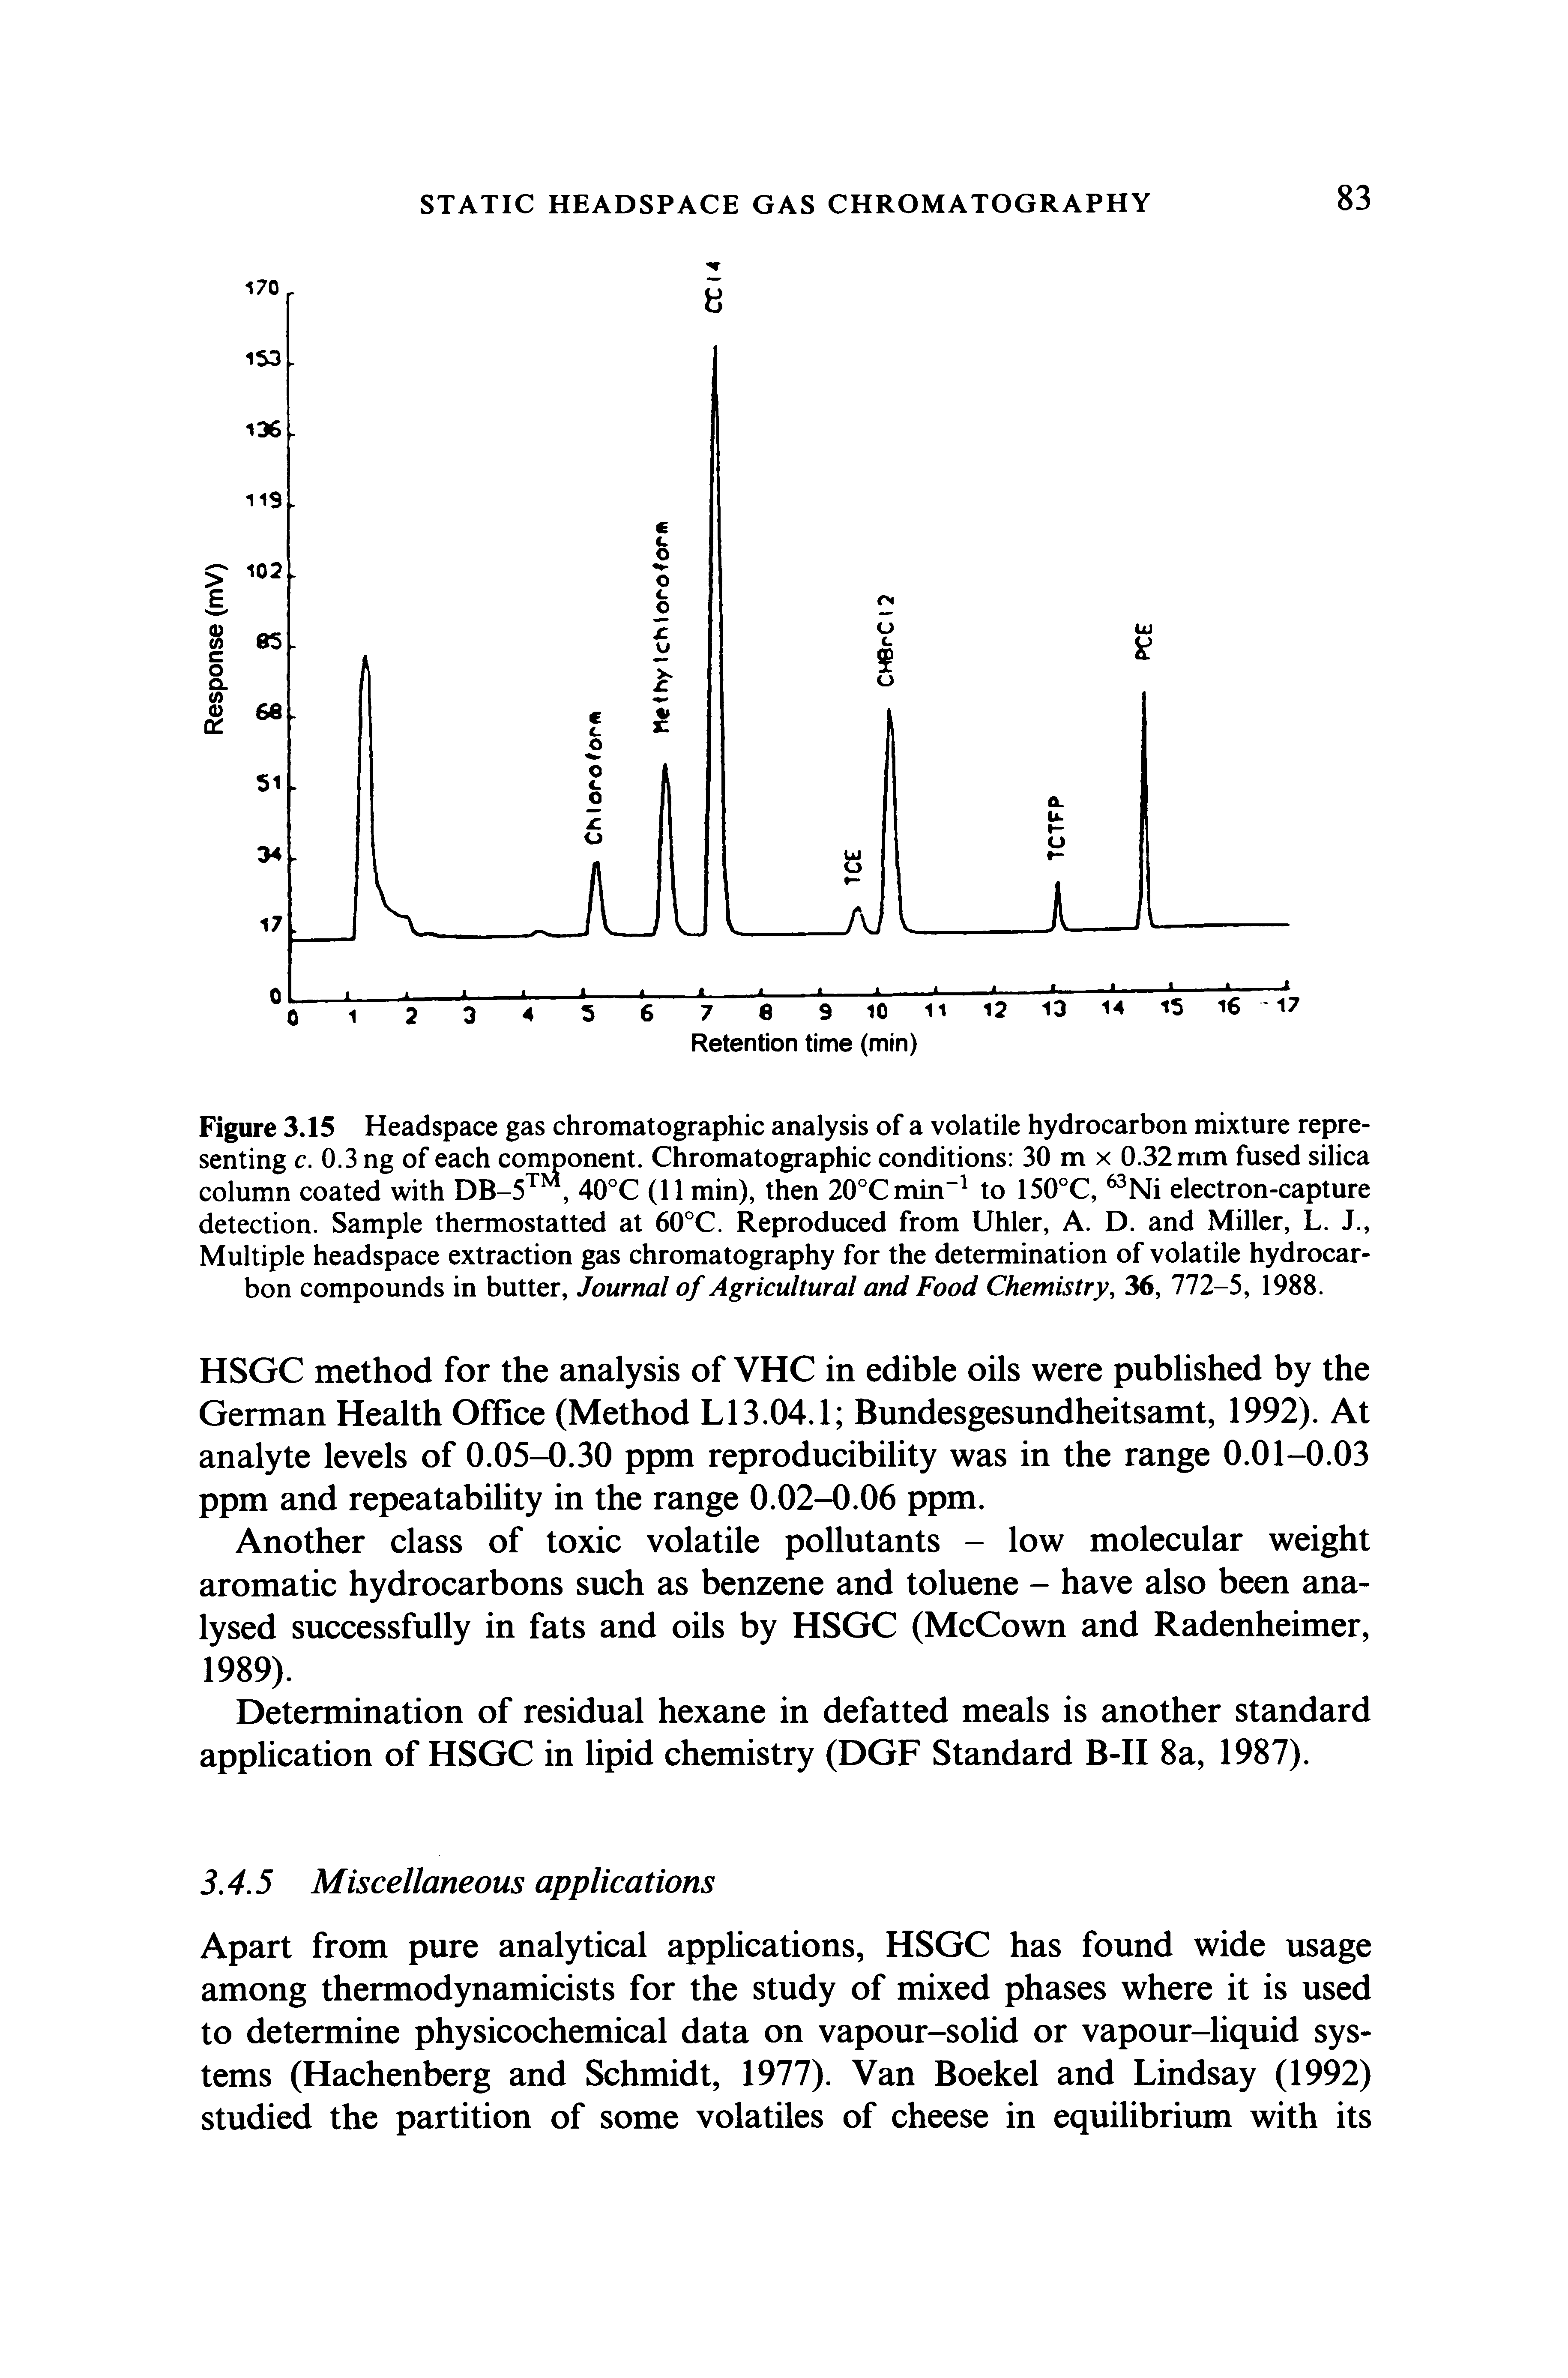 Figure 3.15 Headspace gas chromatographic analysis of a volatile hydrocarbon mixture representing c. 0.3 ng of each component. Chromatographic conditions 30 m x 0.32 mm fused silica column coated with DB-5, 40°C (11 min), then 20°Cmin to 150°C, Ni electron-capture detection. Sample thermostatted at 60°C. Reproduced from Uhler, A. D. and Miller, L. J., Multiple headspace extraction gas chromatography for the determination of volatile hydrocarbon compounds in butter, Journal of Agricultural and Food Chemistry, 36, 772-5, 1988.